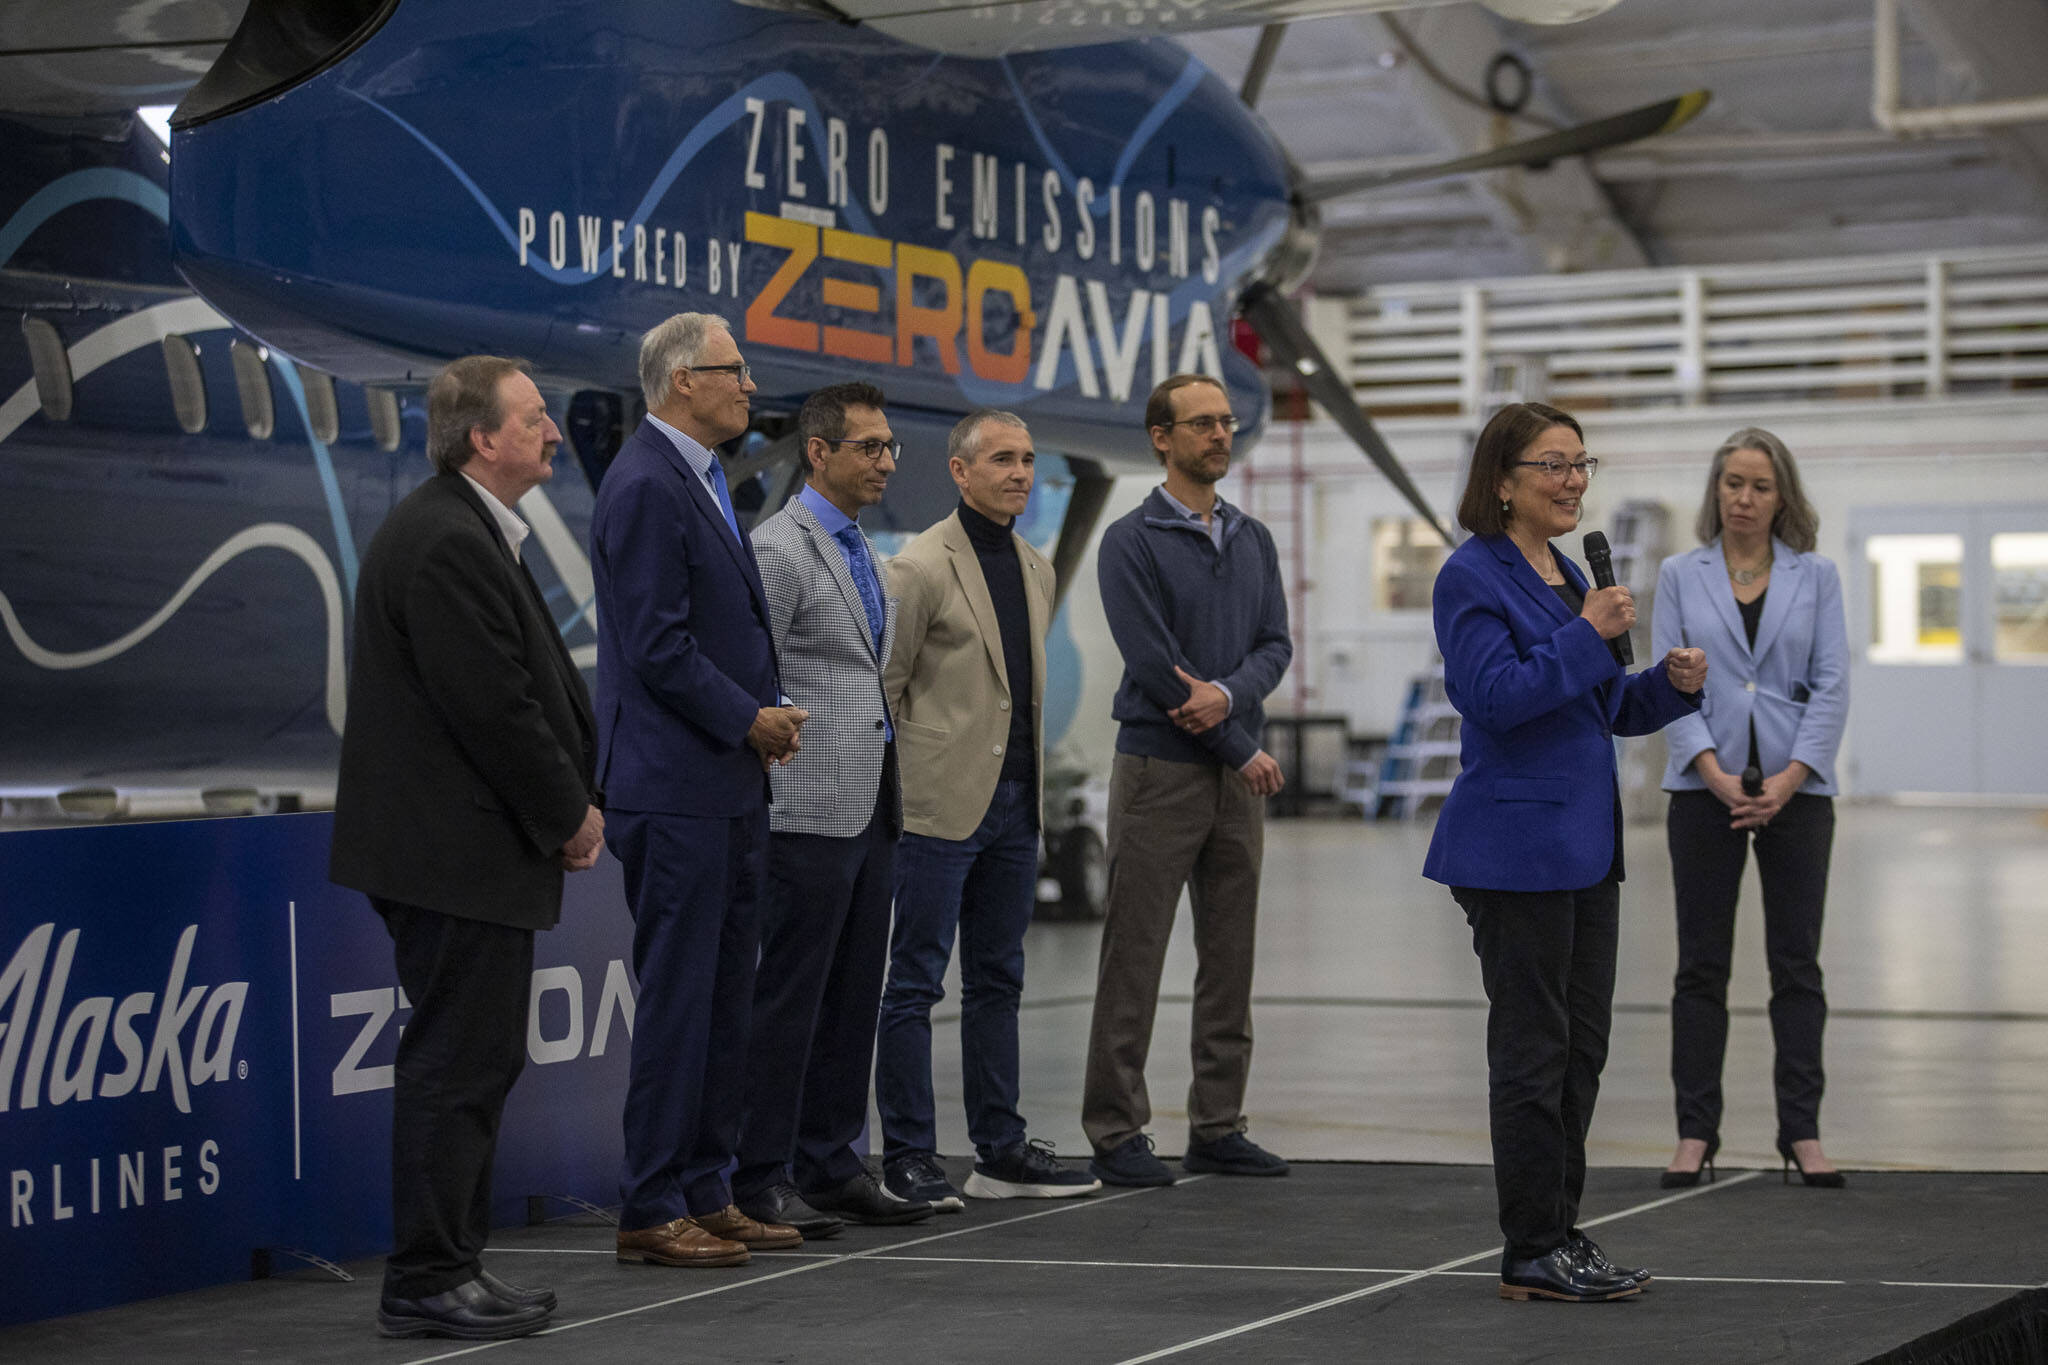 U.S. Rep. Suzan DelBene speaks during an event for Alaska Airlines and ZeroAvia to discuss their new collaboration in Everett, Washington on Monday, May 1, 2023. ZeroAvia is developing a hydrogen electric propulsion system for aircraft. (Annie Barker / The Herald)